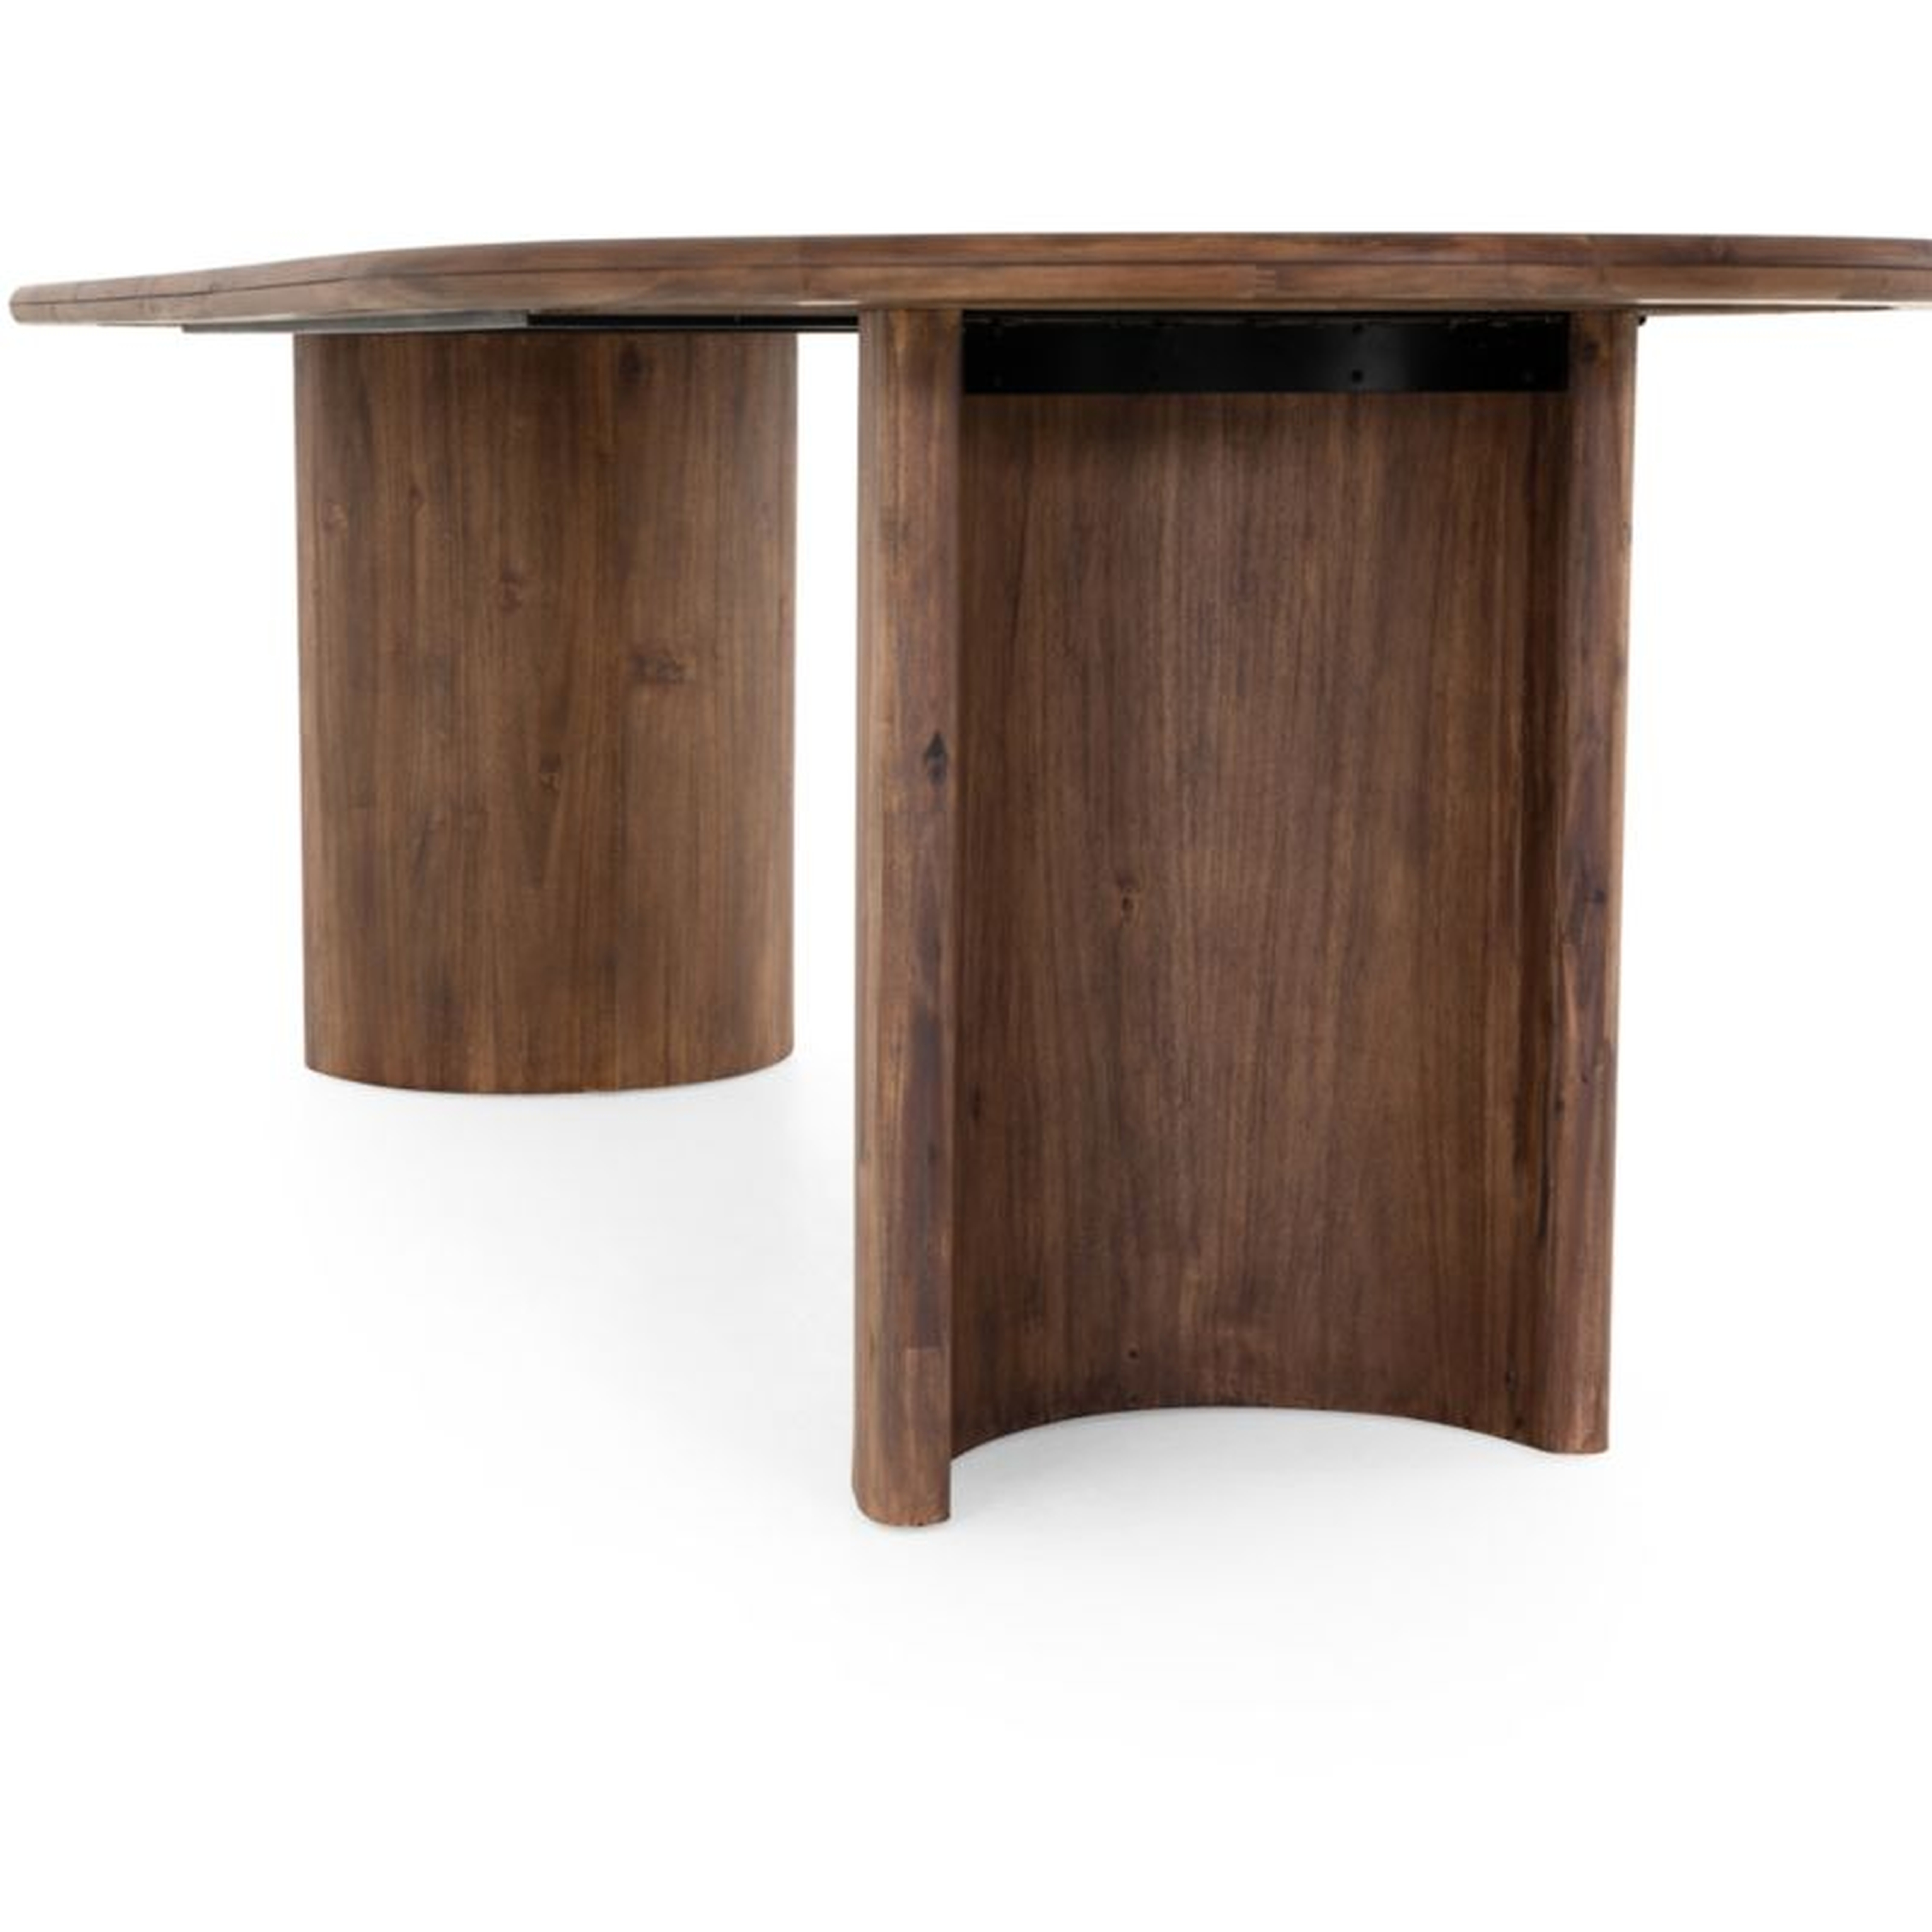 Panos 94" Dining Table. - Crate and Barrel